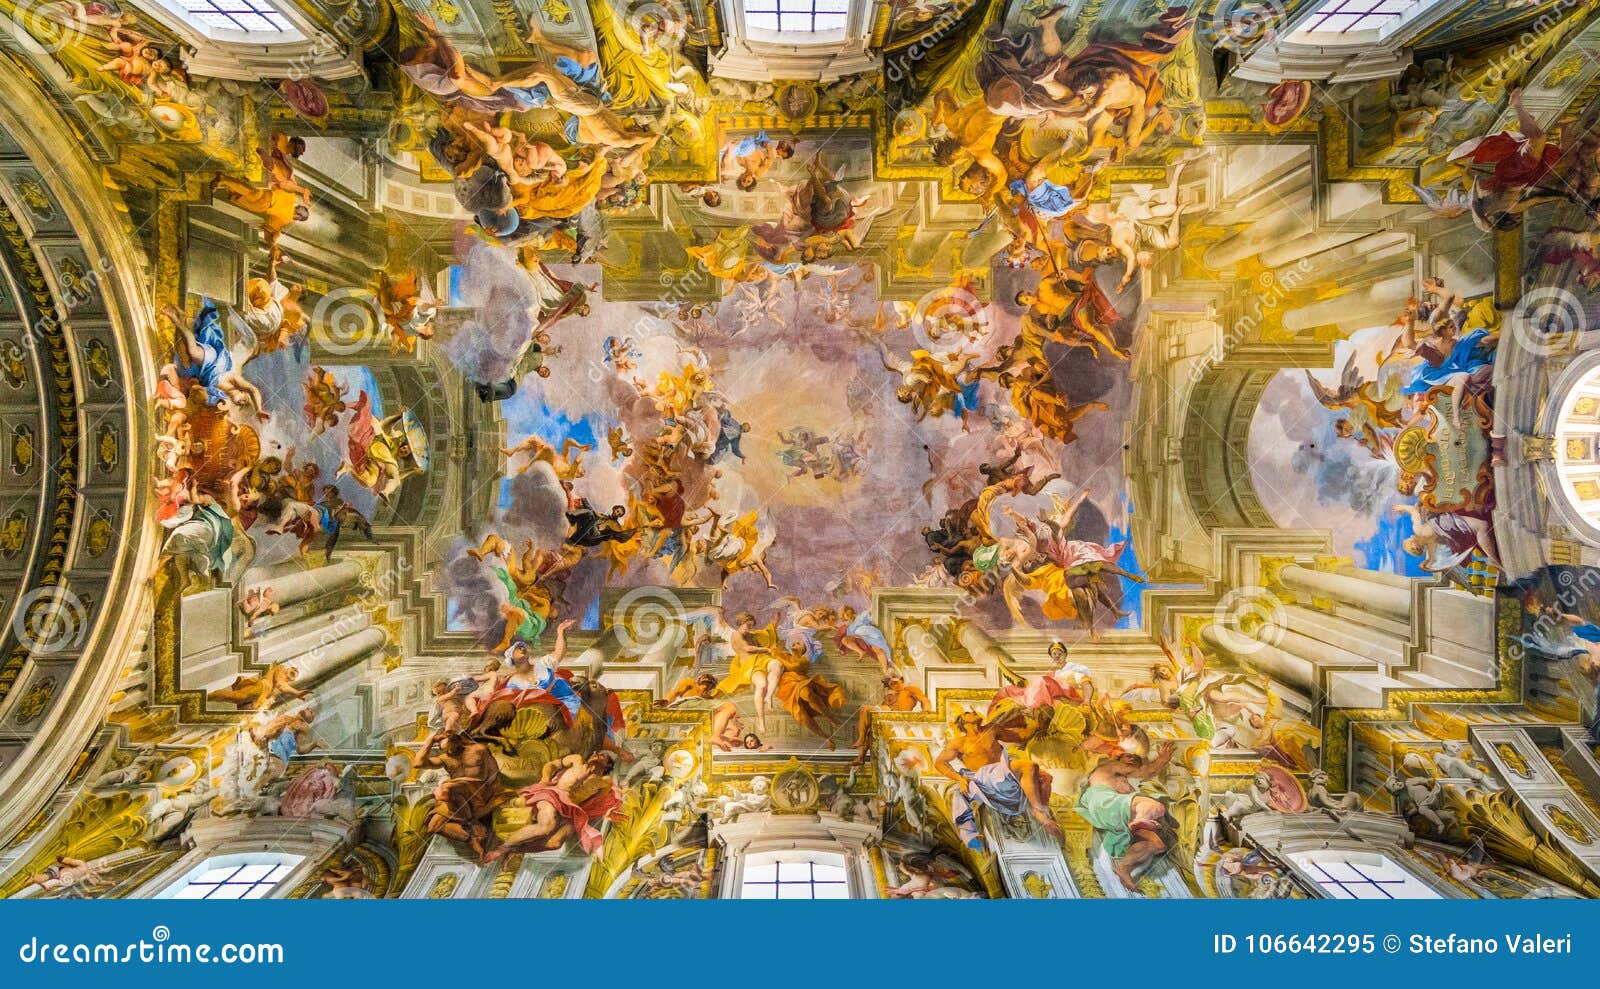 the ceiling of the church of saint ignatius of loyola in rome, italy.